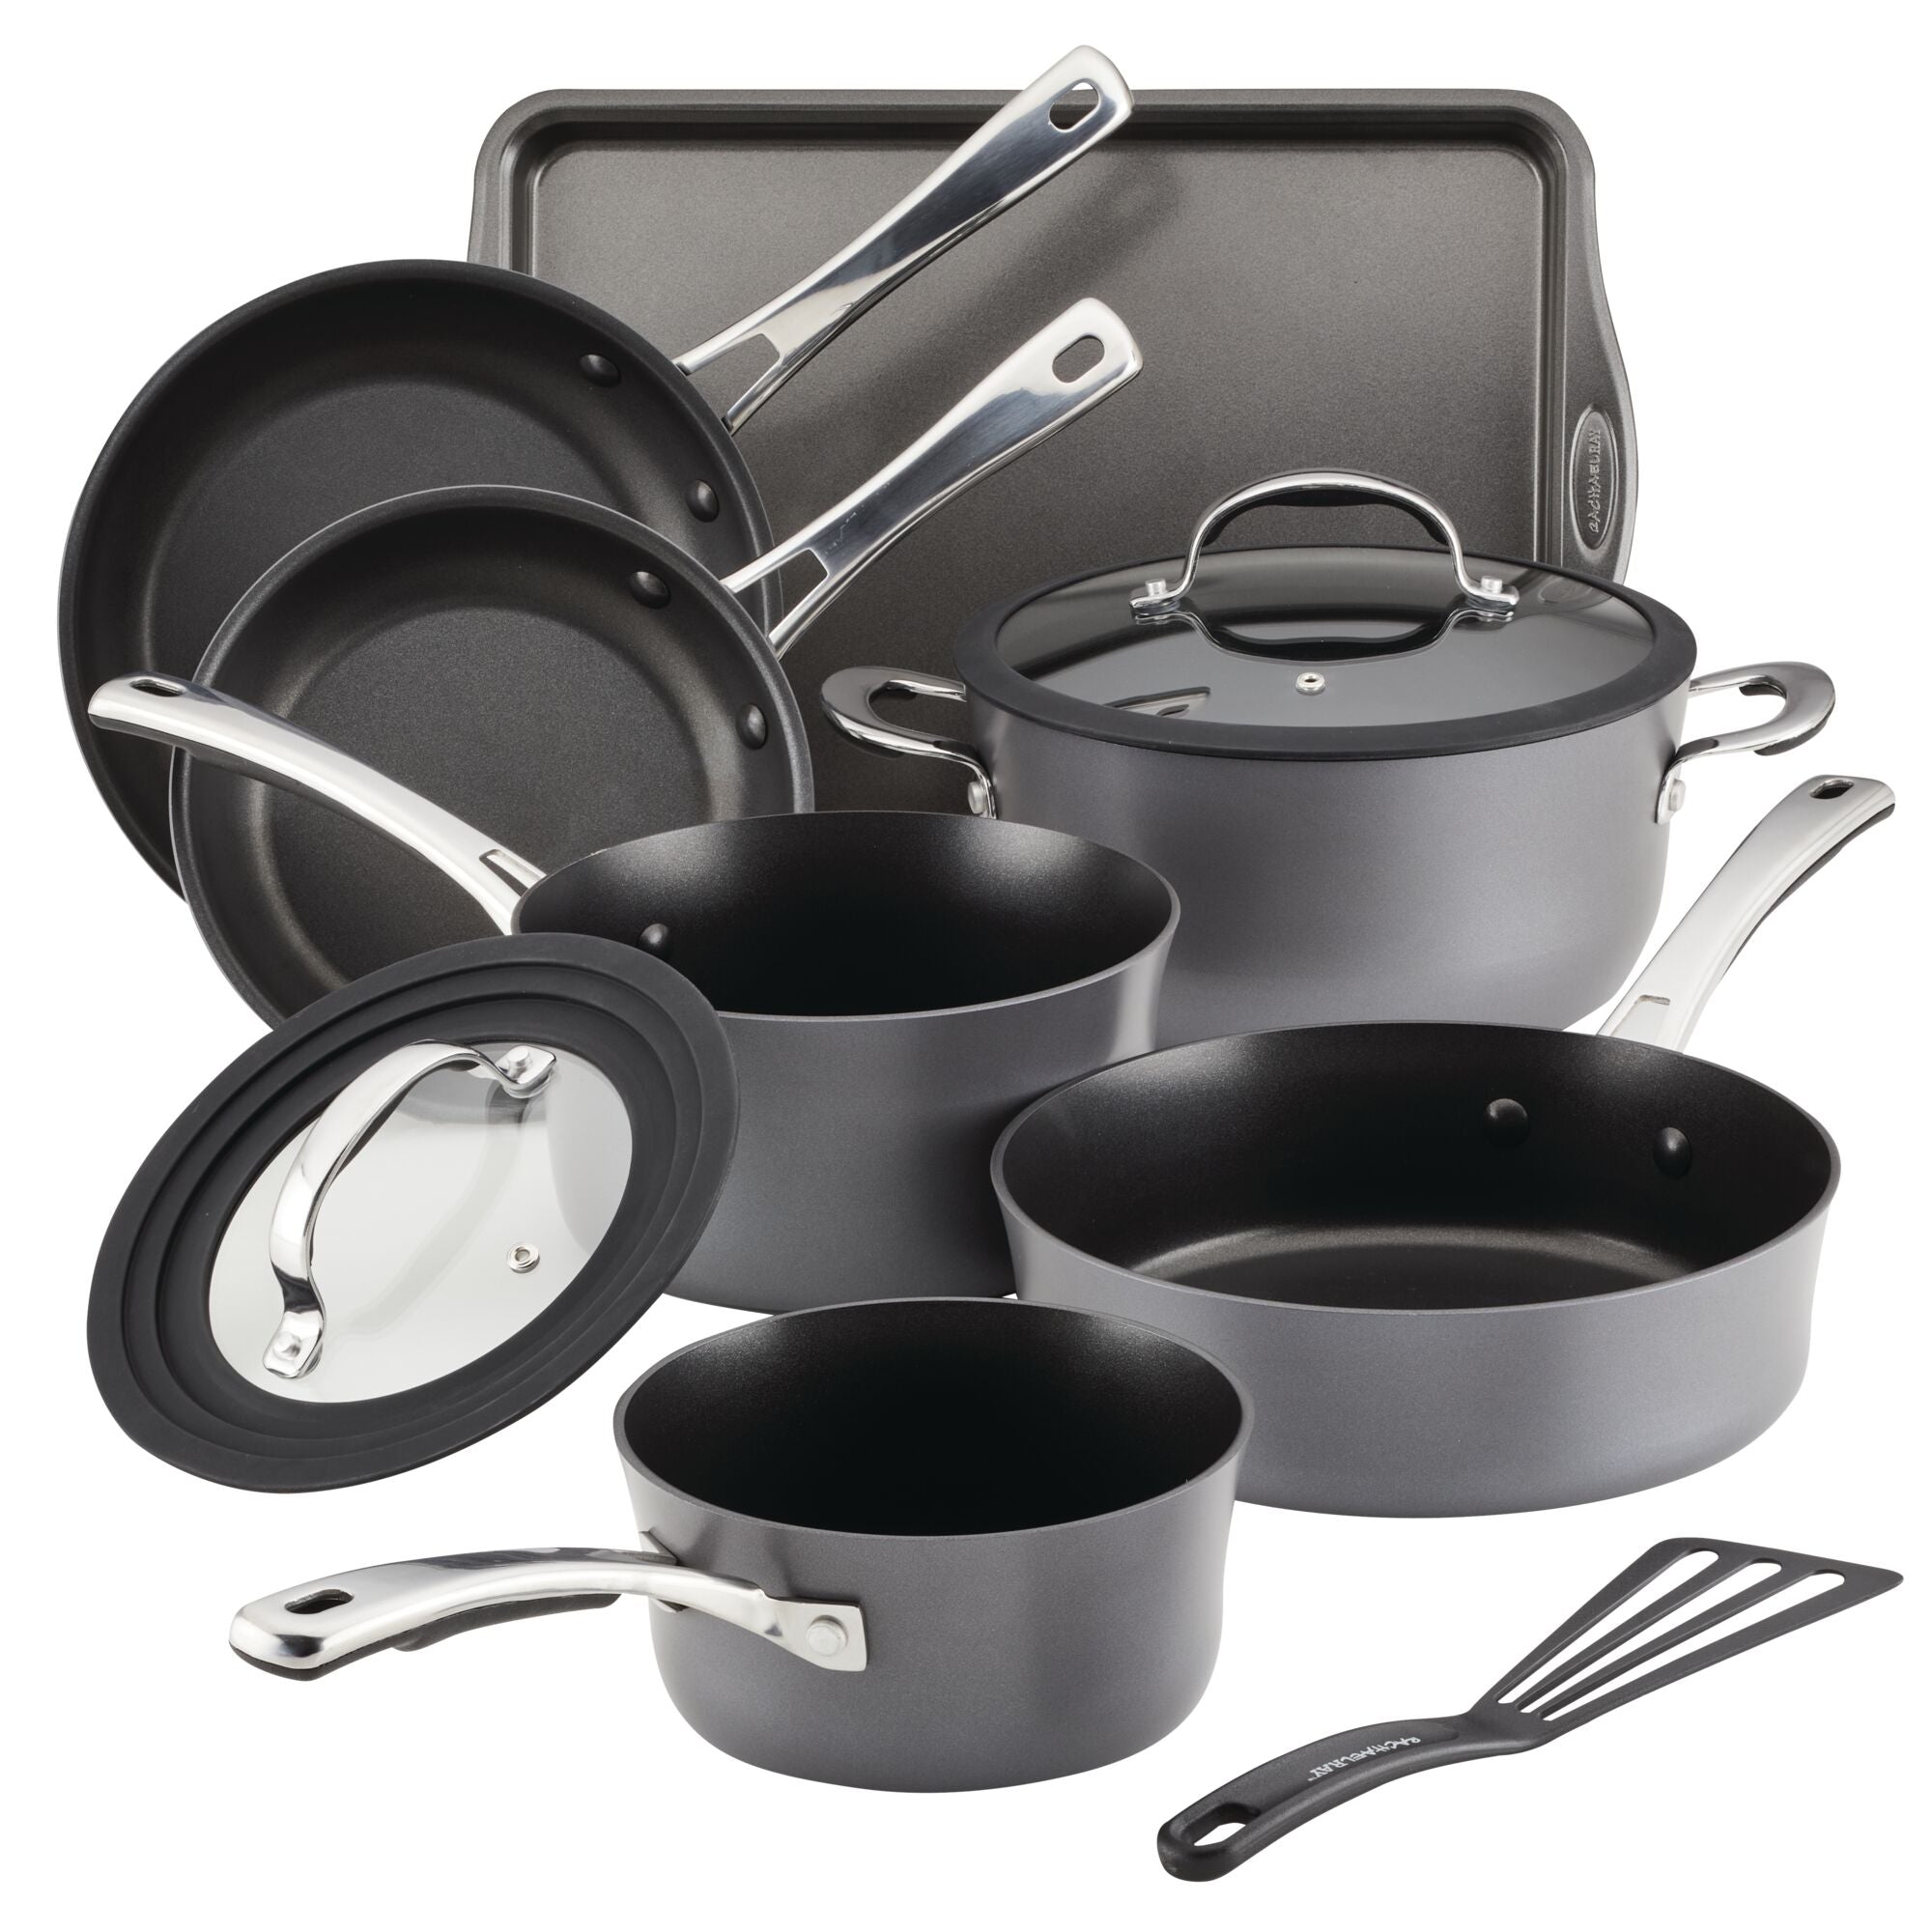 Food Network 10-pc. Hard-Anodized Nonstick Space-Saving Cookware Set Light  Grey